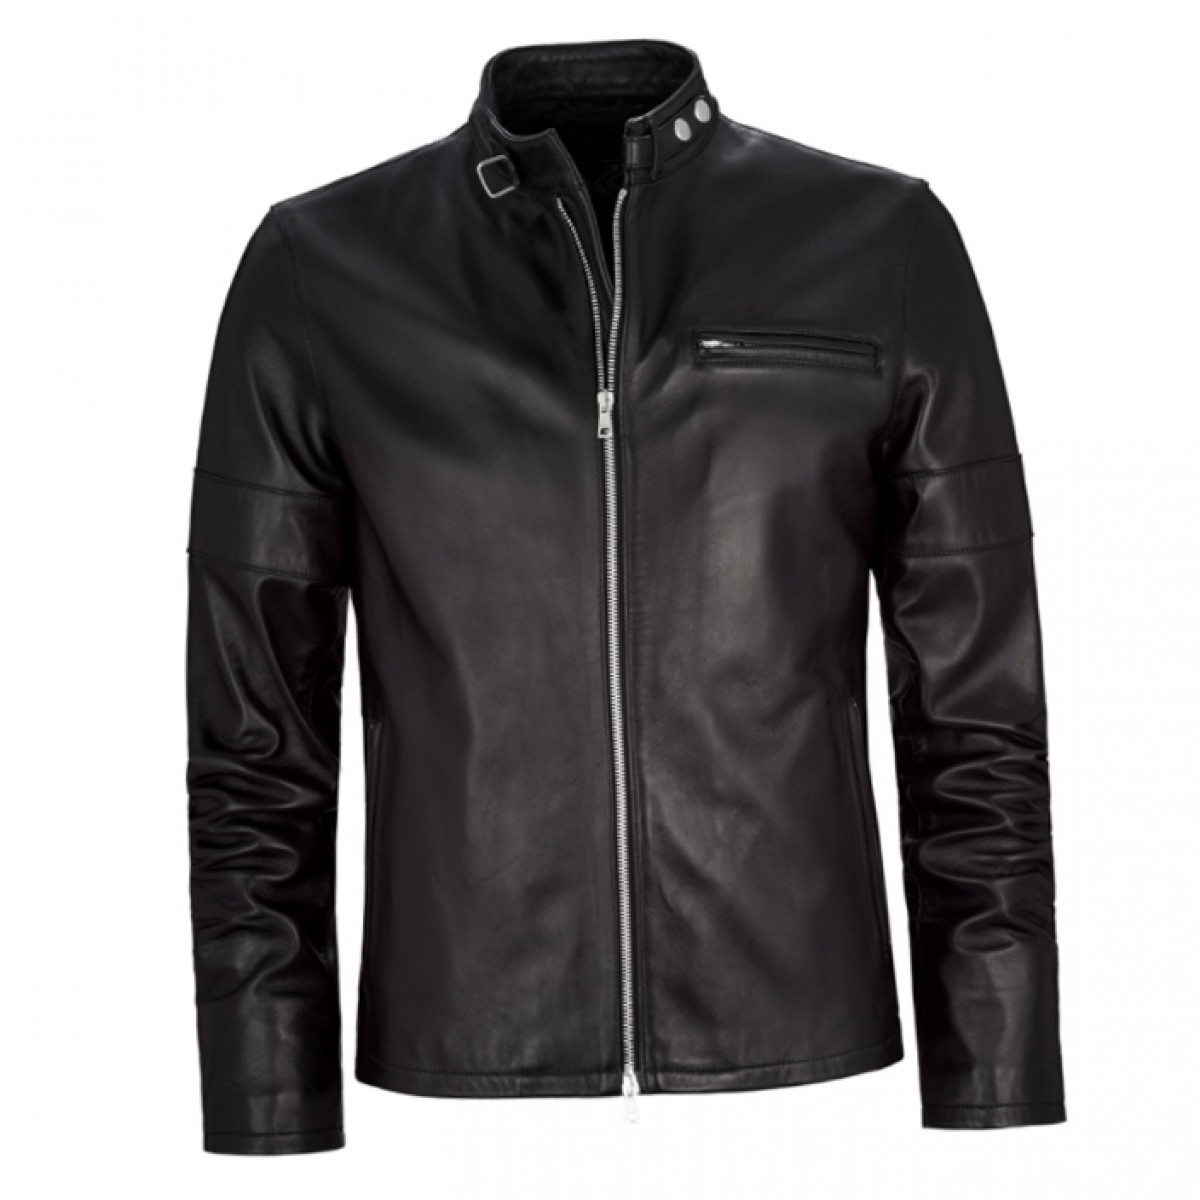 Motorcycle Leather Jackets For Men - Ionia Sports